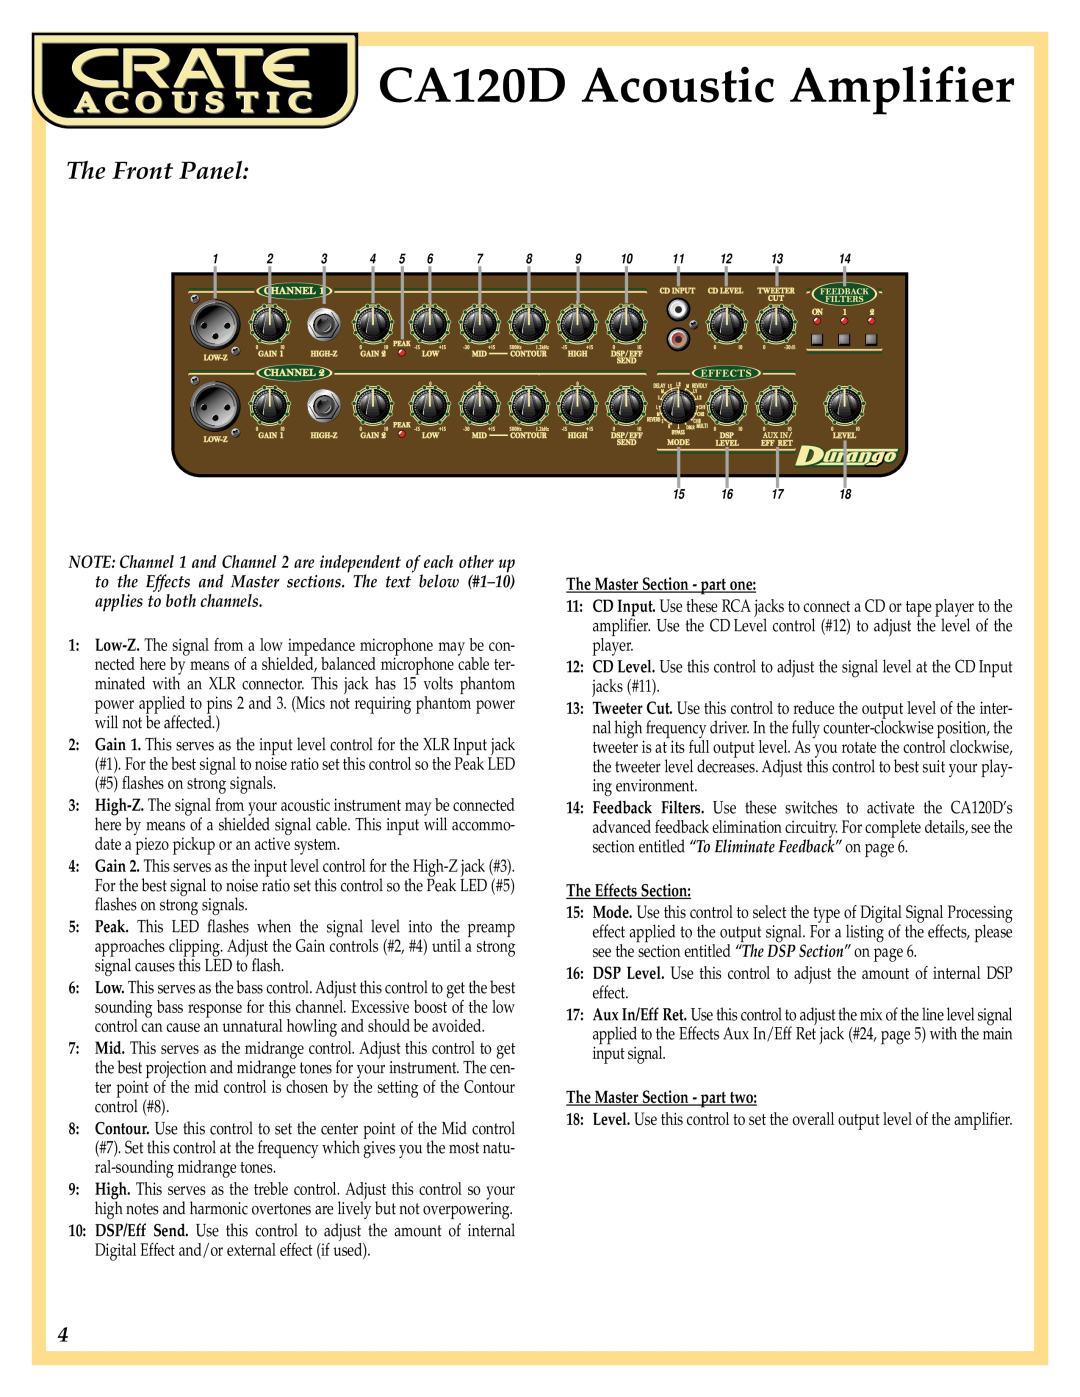 Crate Amplifiers manual The Front Panel, CA120D Acoustic Amplifier, The Master Section - part one, The Effects Section 